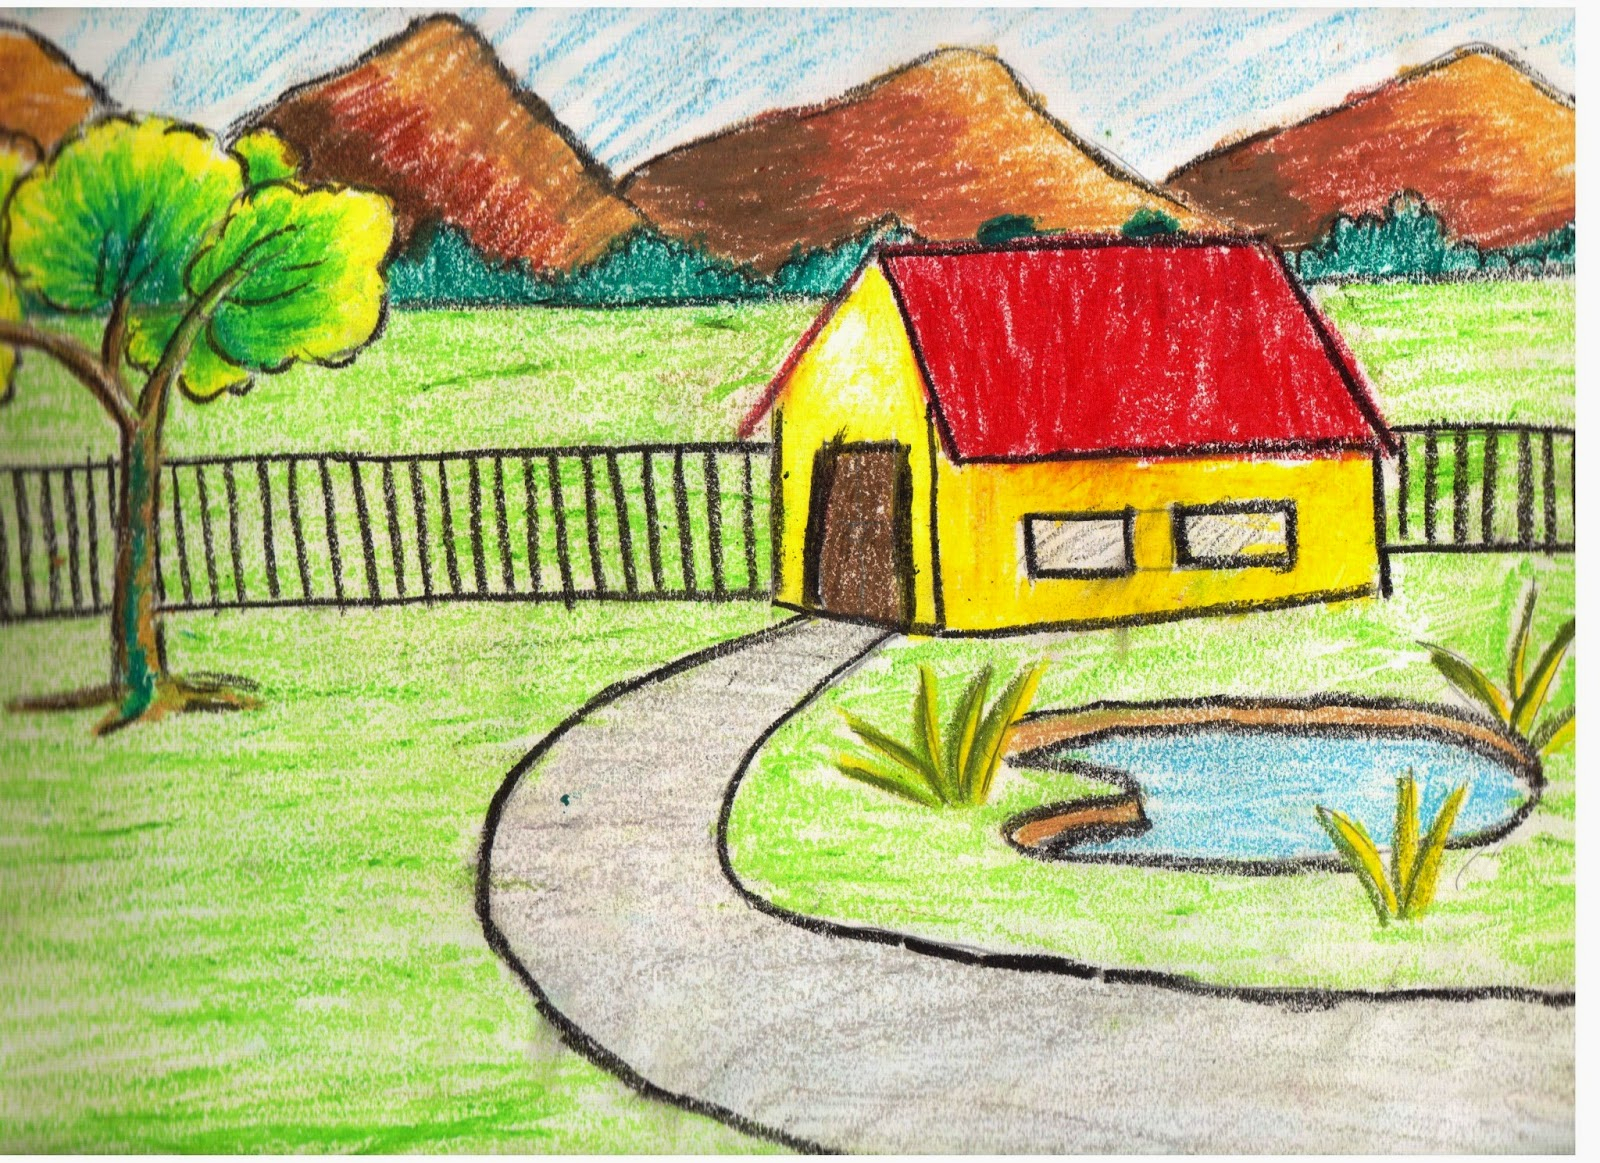 easy scenery drawing for kids